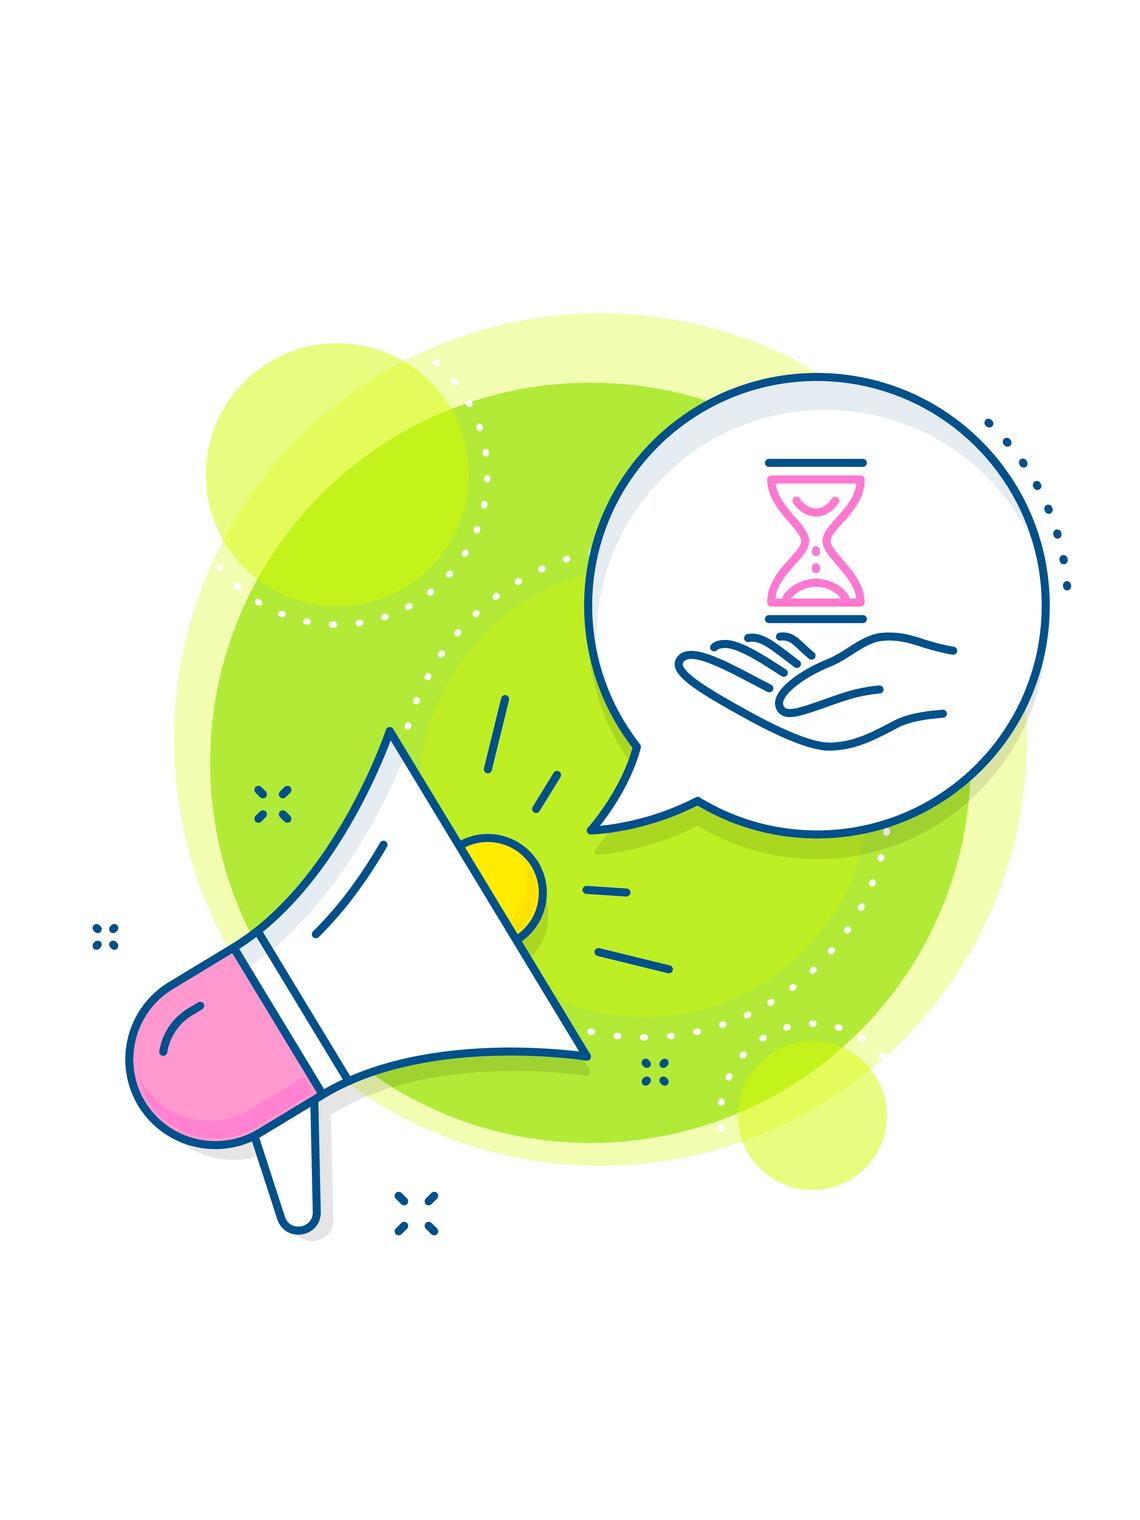 A small cartoon of a pink megaphone. In a green circle there is a blue cartoon hand holding a pink hourglass. 